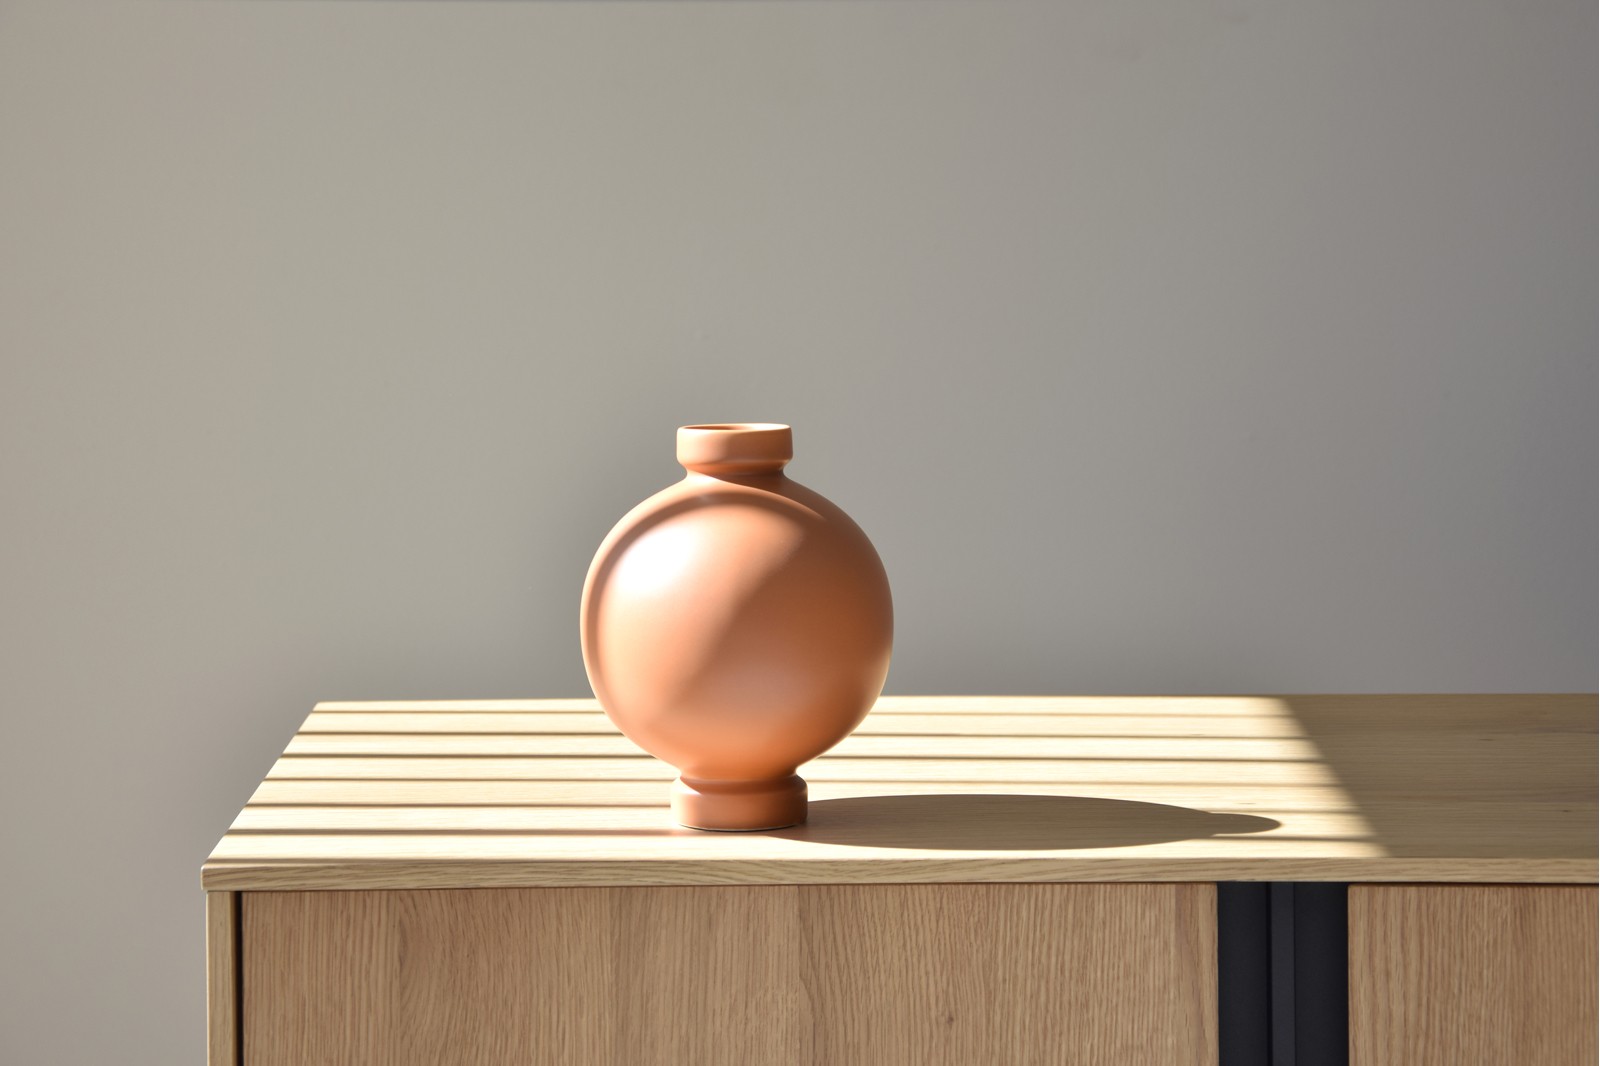 BALL COLLECTION: CERAMIC VASES